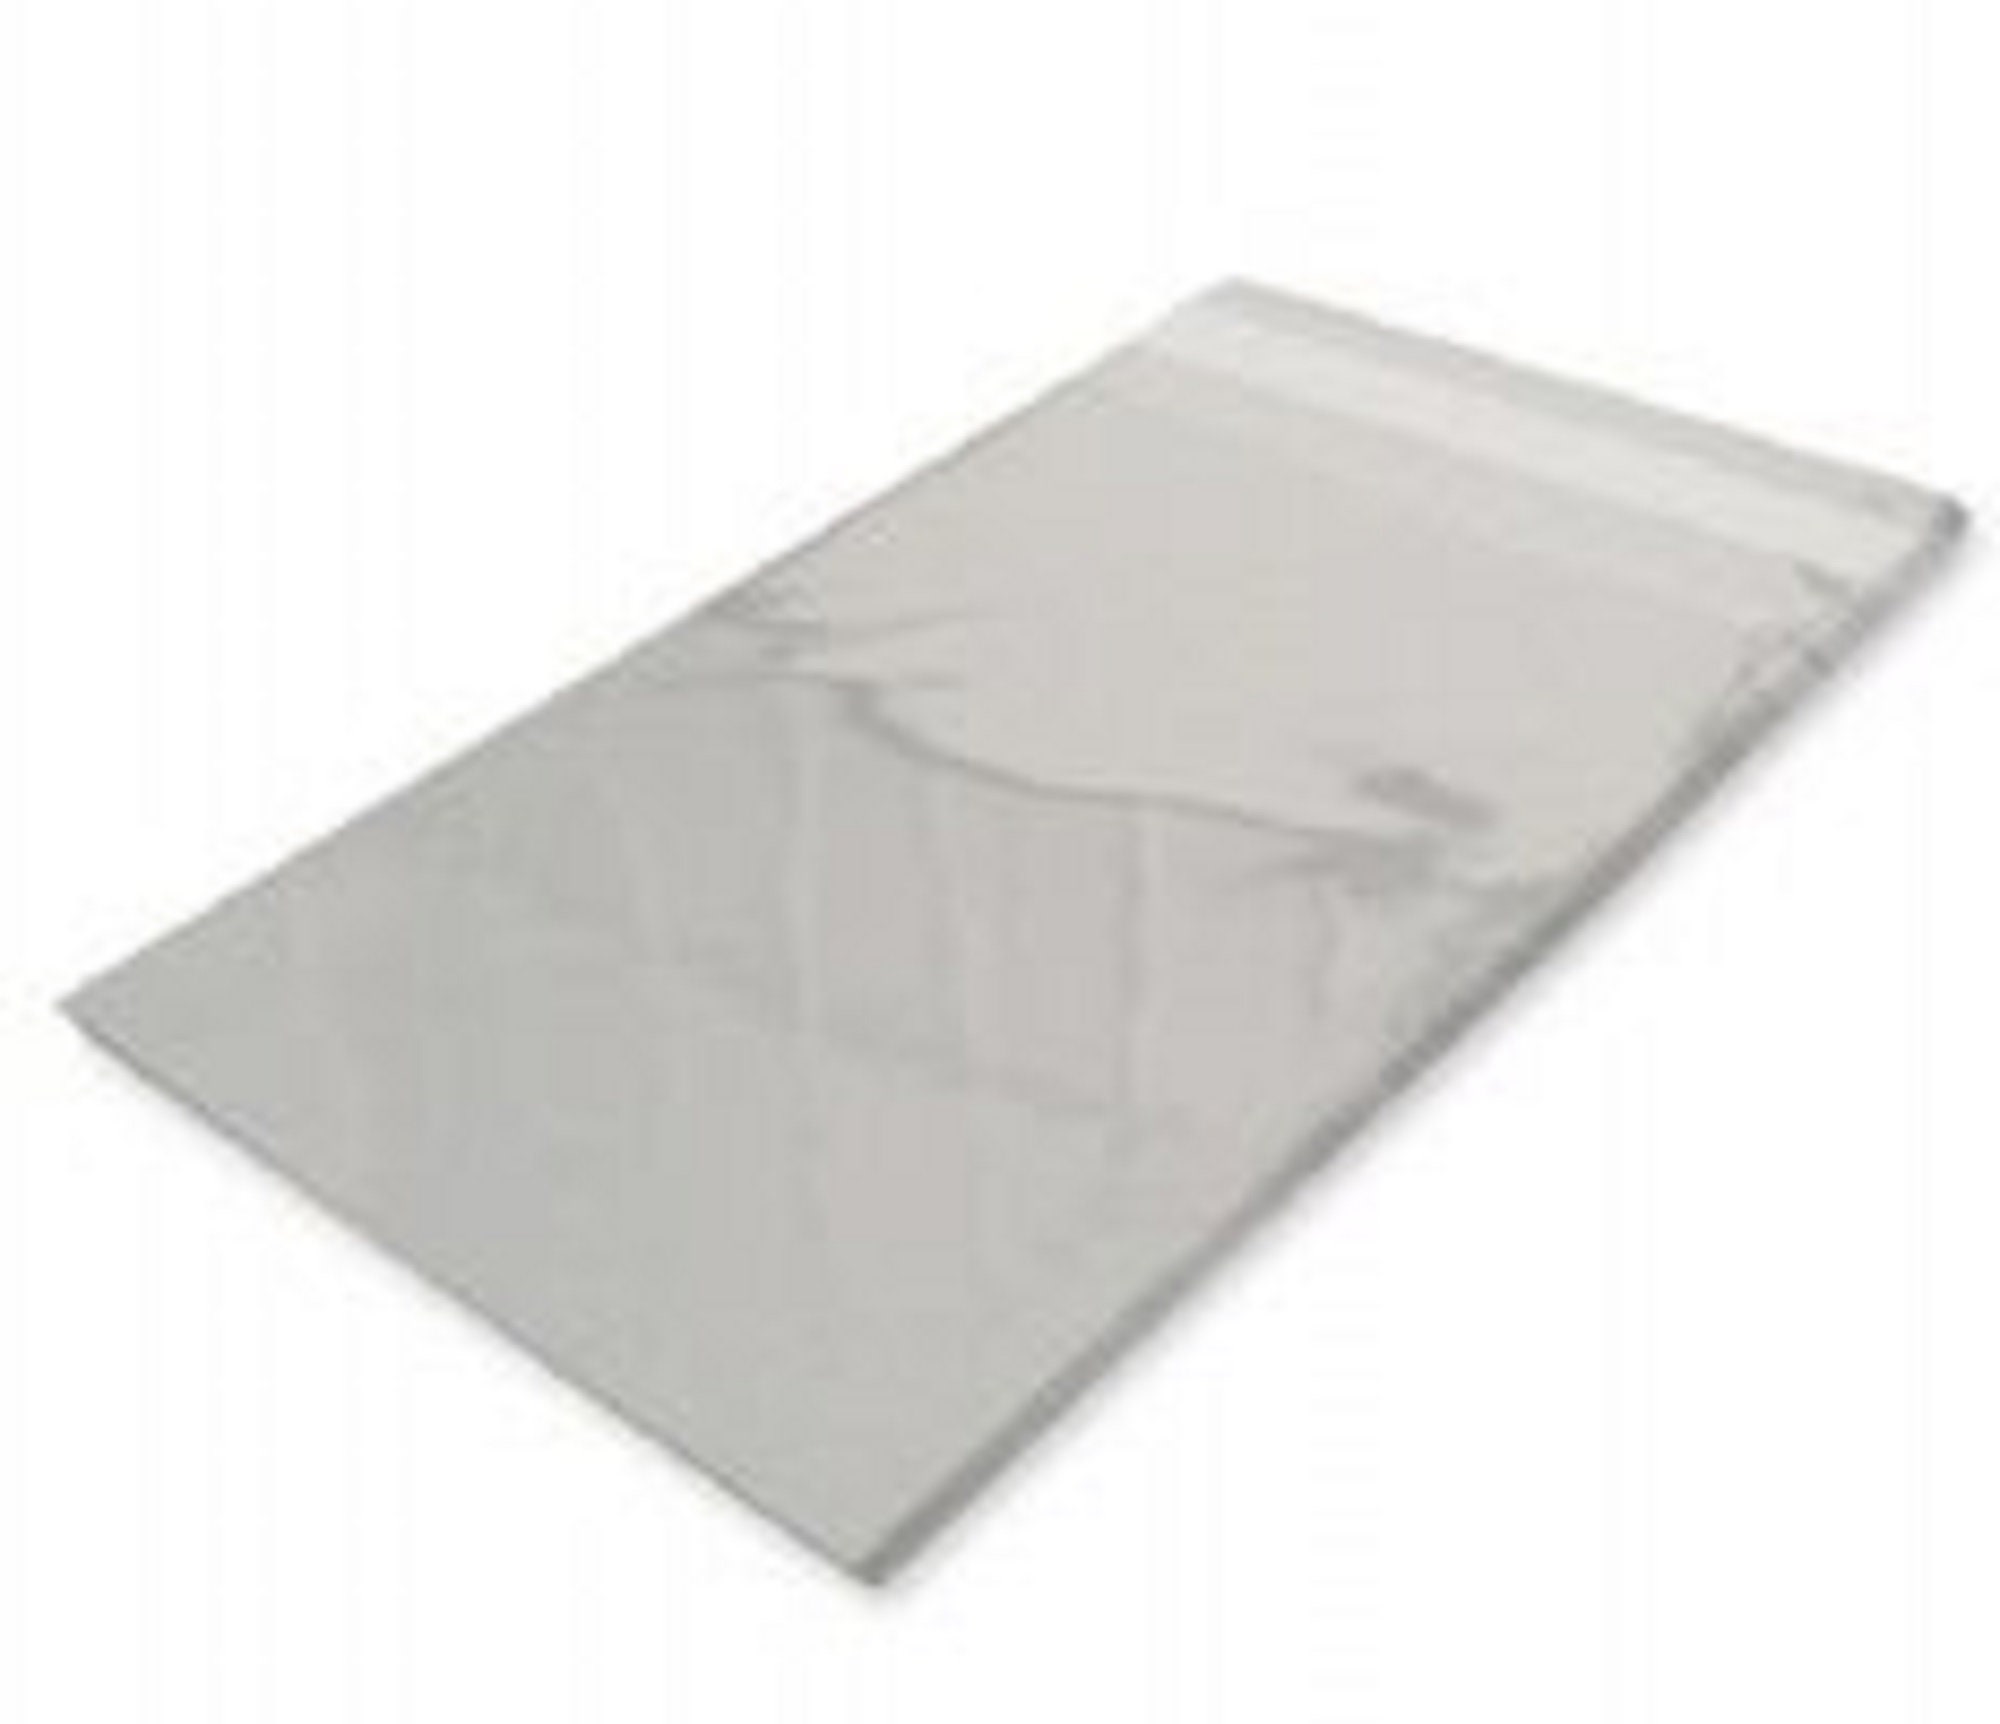 50 Crystal Clear Cellophane Cello Greeting Cards Bags 137mm x 184mm 